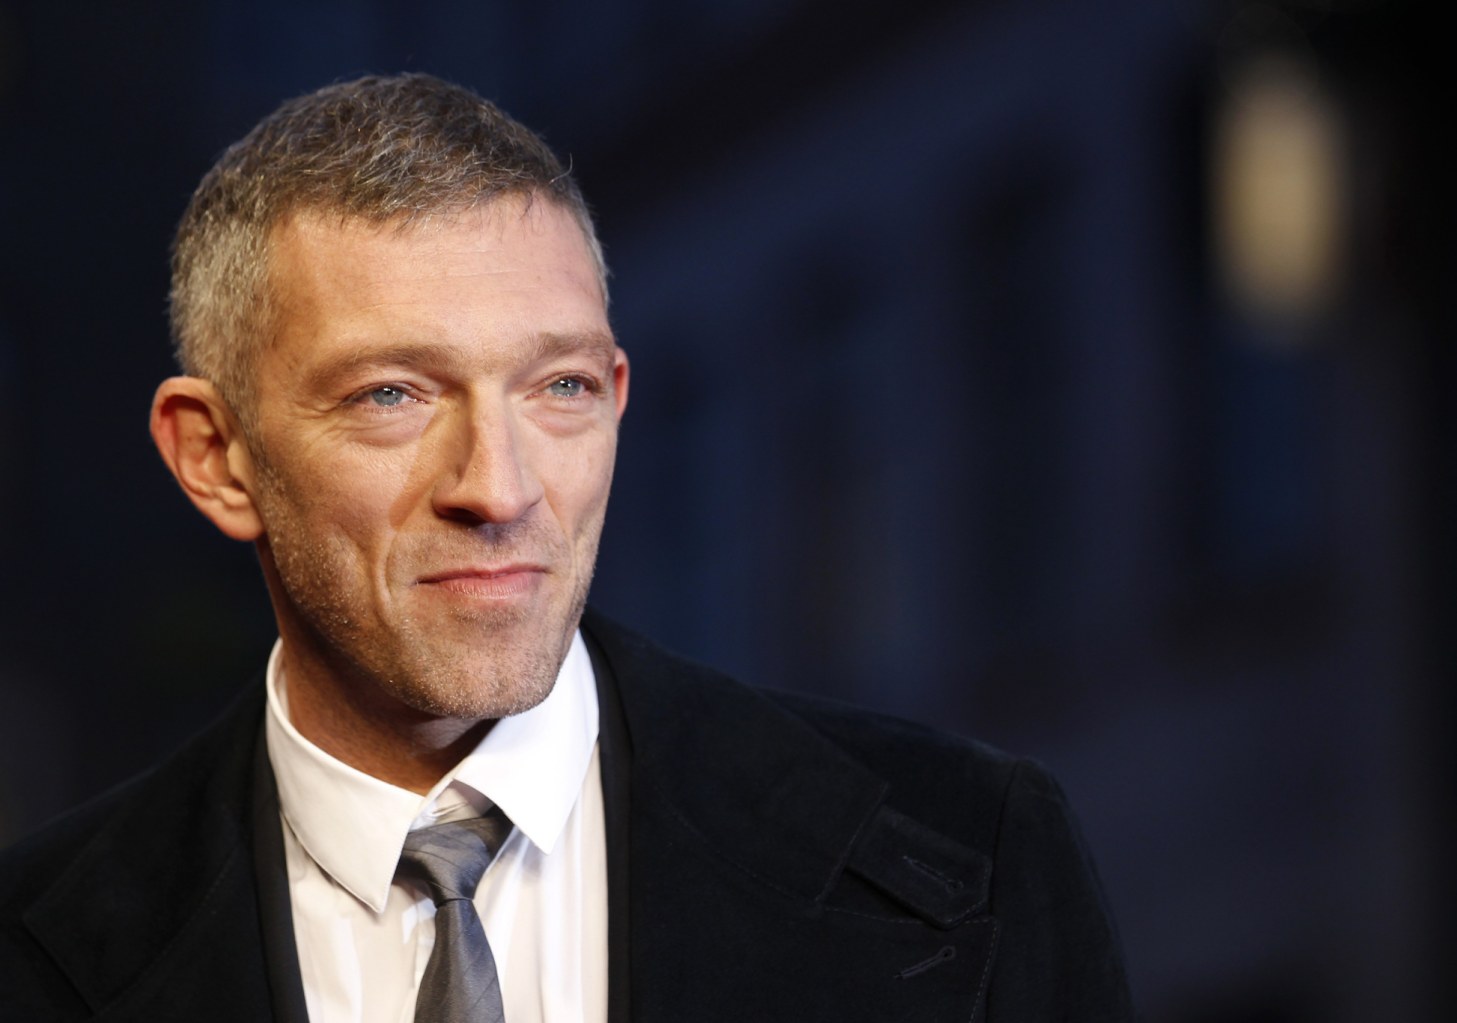 Vincent Cassel photo 126 of 160 pics, wallpaper - photo #600098 - ThePlace2